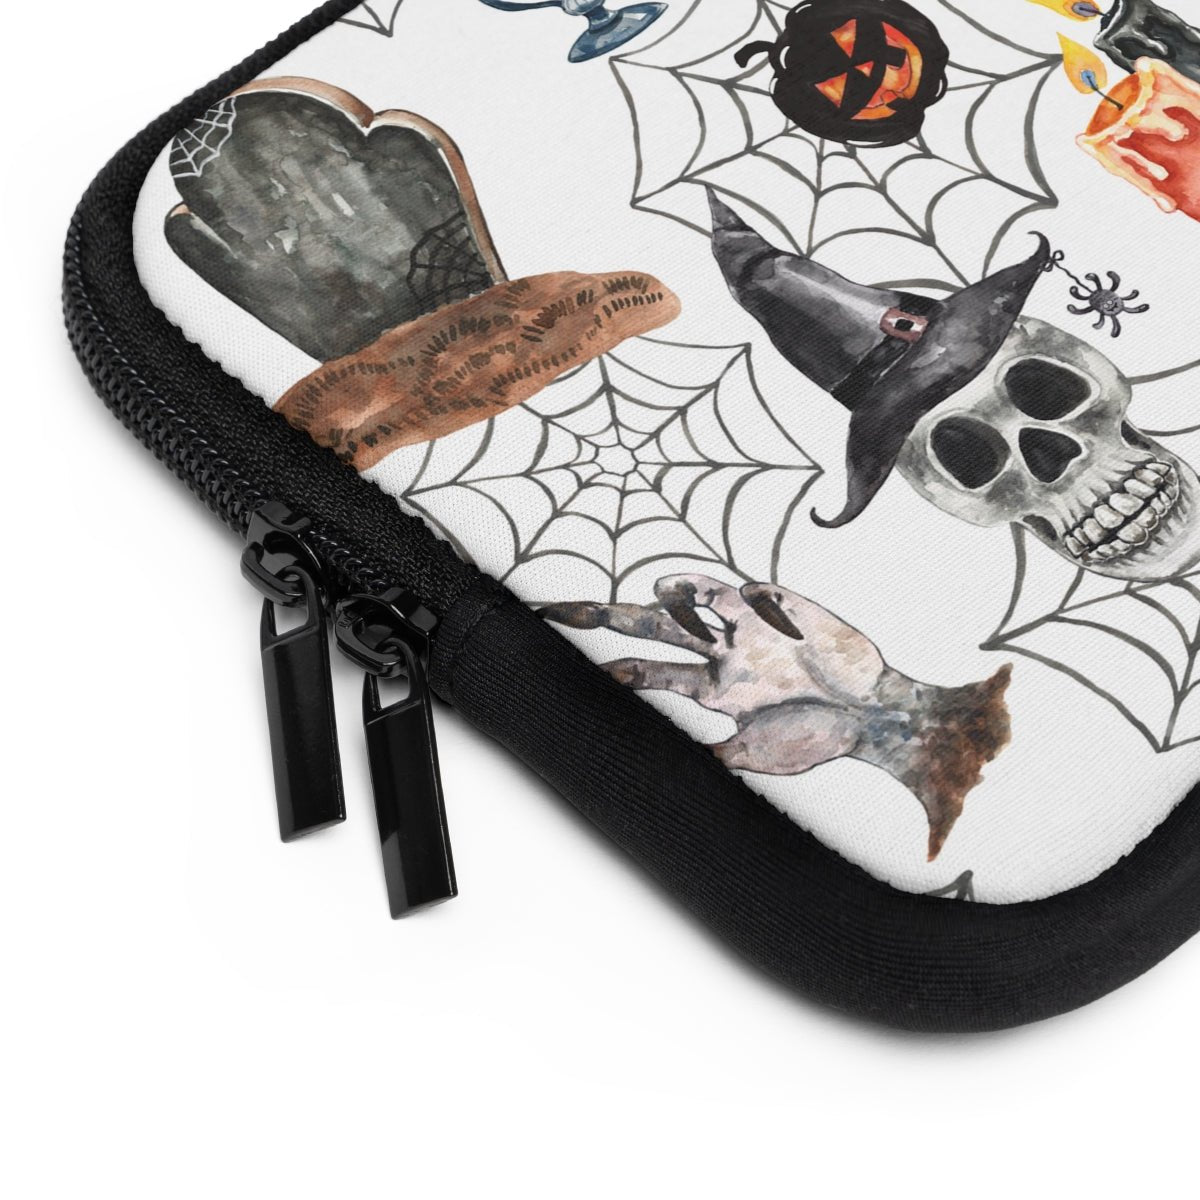 Skulls and Pumpkins Laptop Sleeve - Puffin Lime